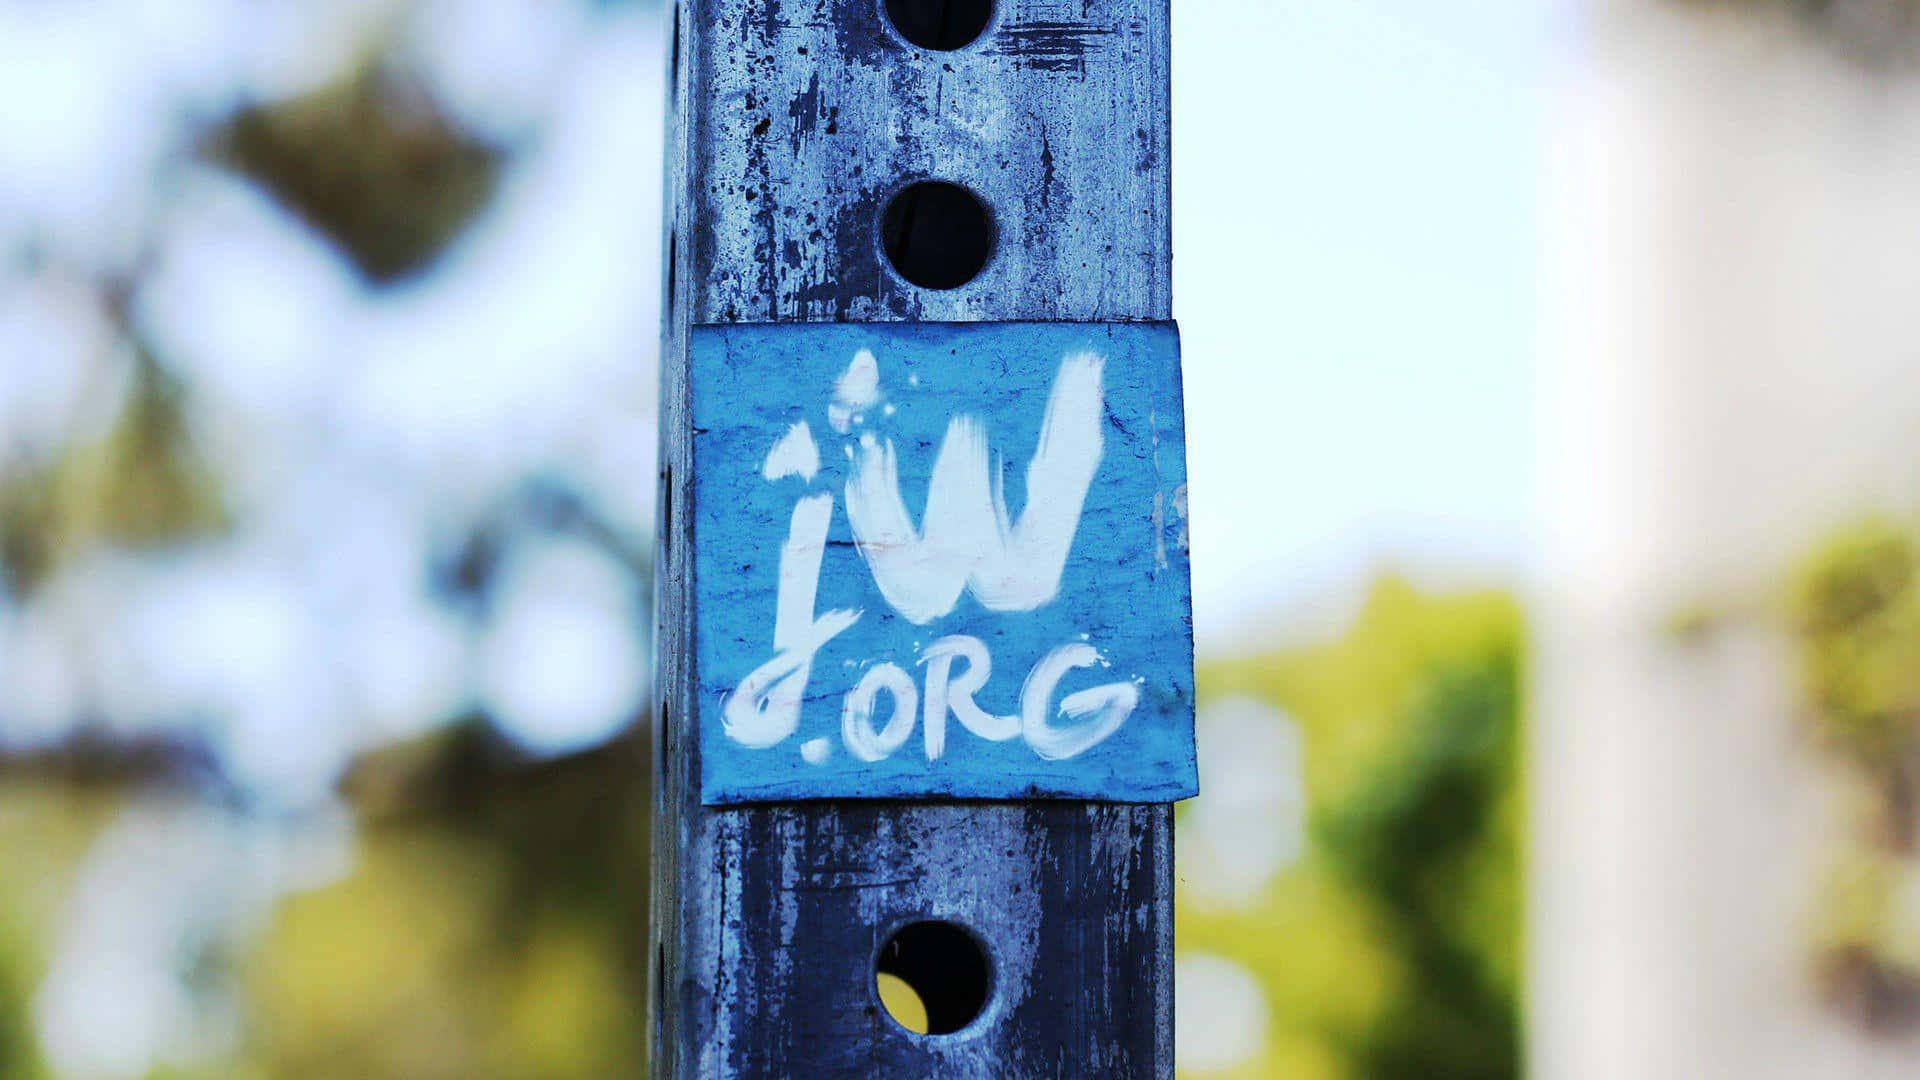 JWorg Logo Placed On Wooden Pole Wallpaper